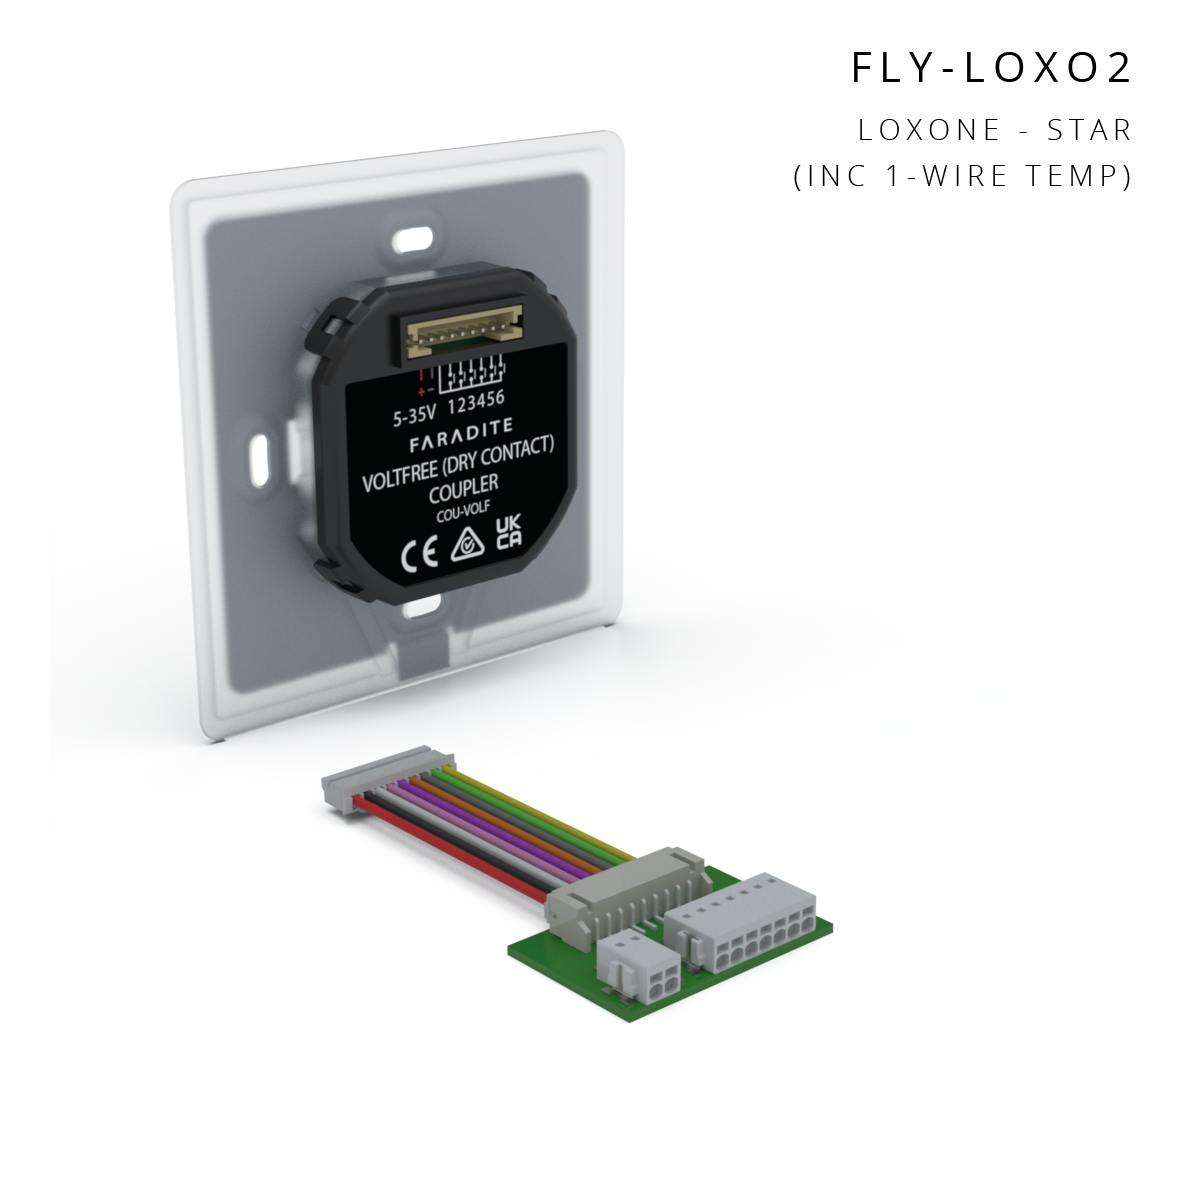 Loxone 1-wire connected to Volt Free TAP keypad